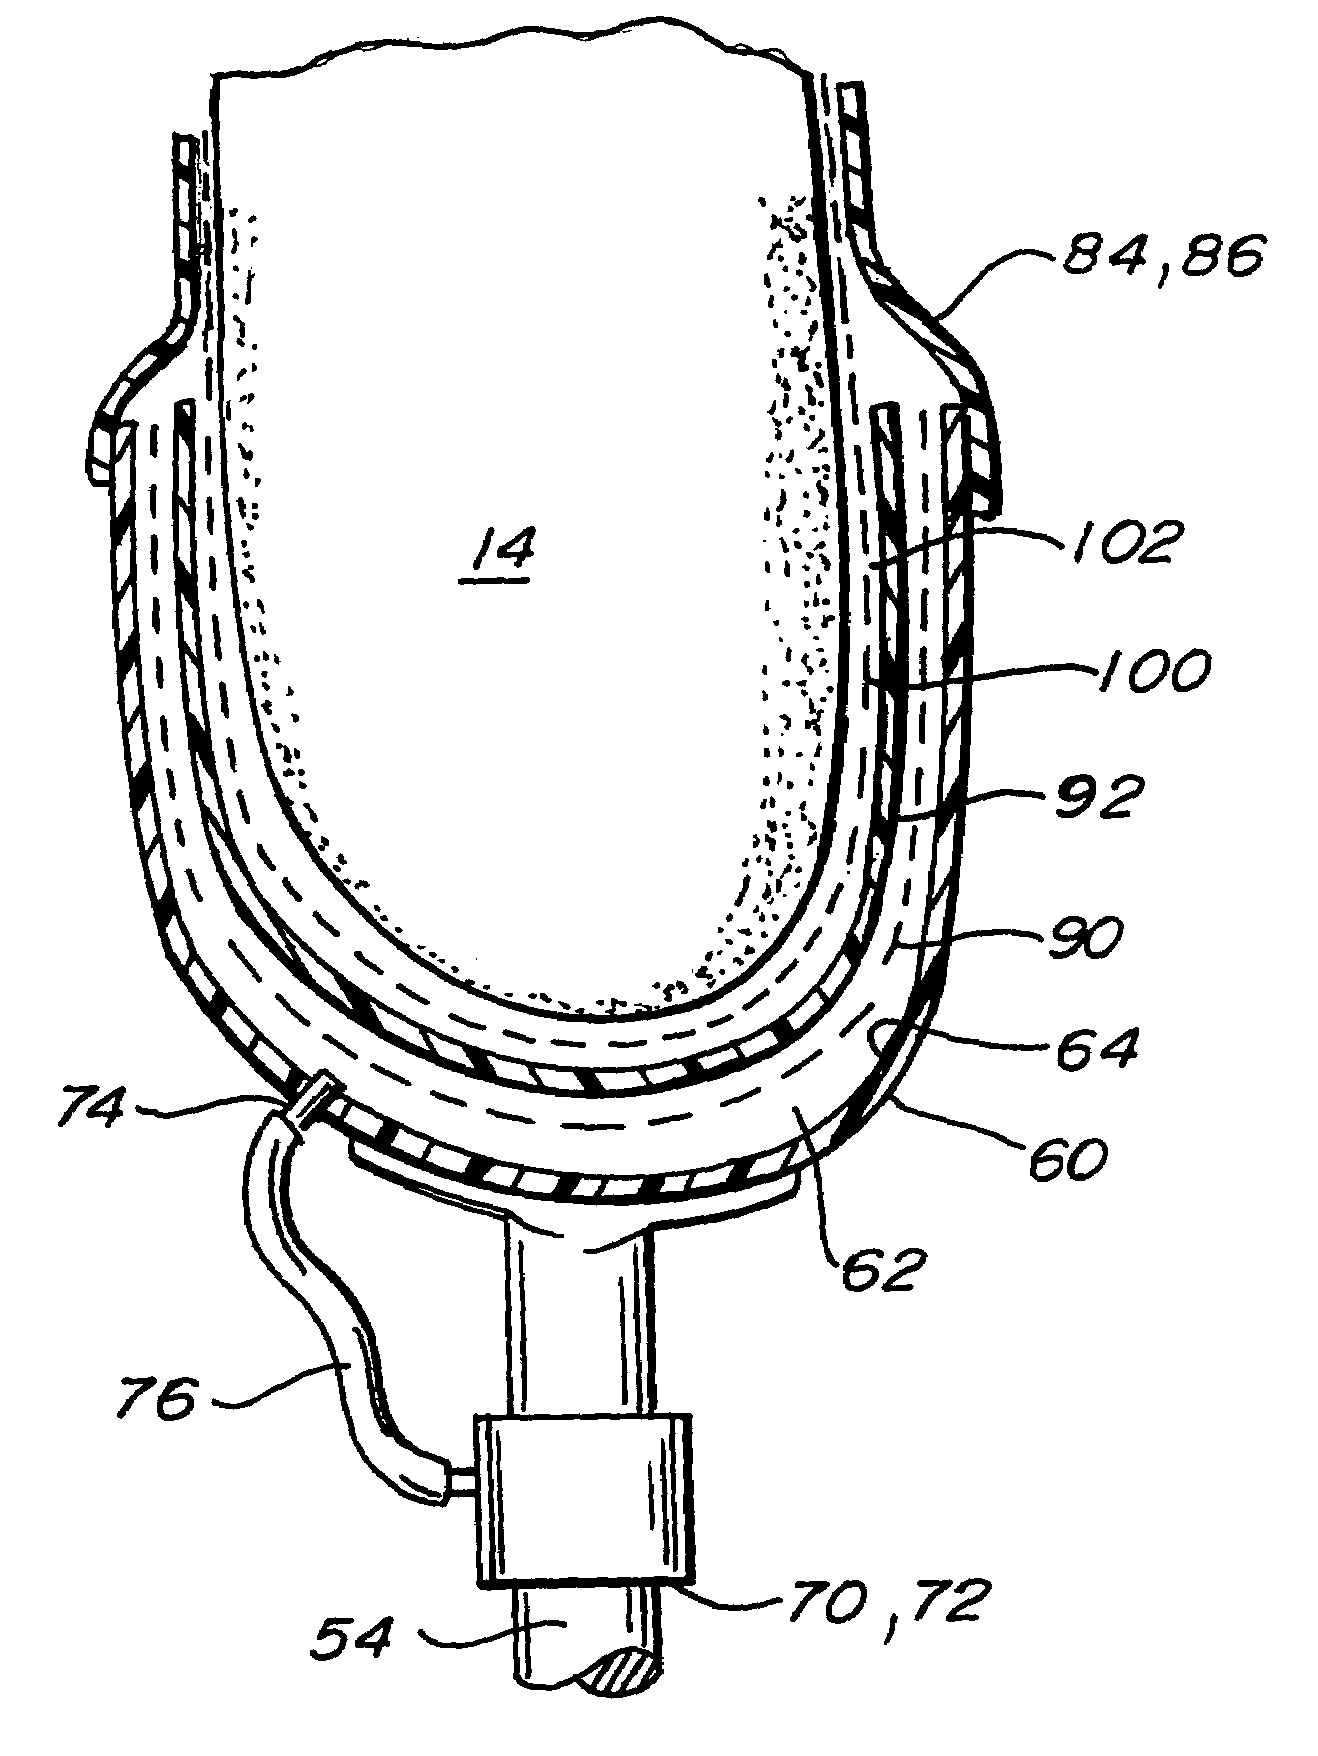 Osmotic membrane and vacuum system for artificial limb